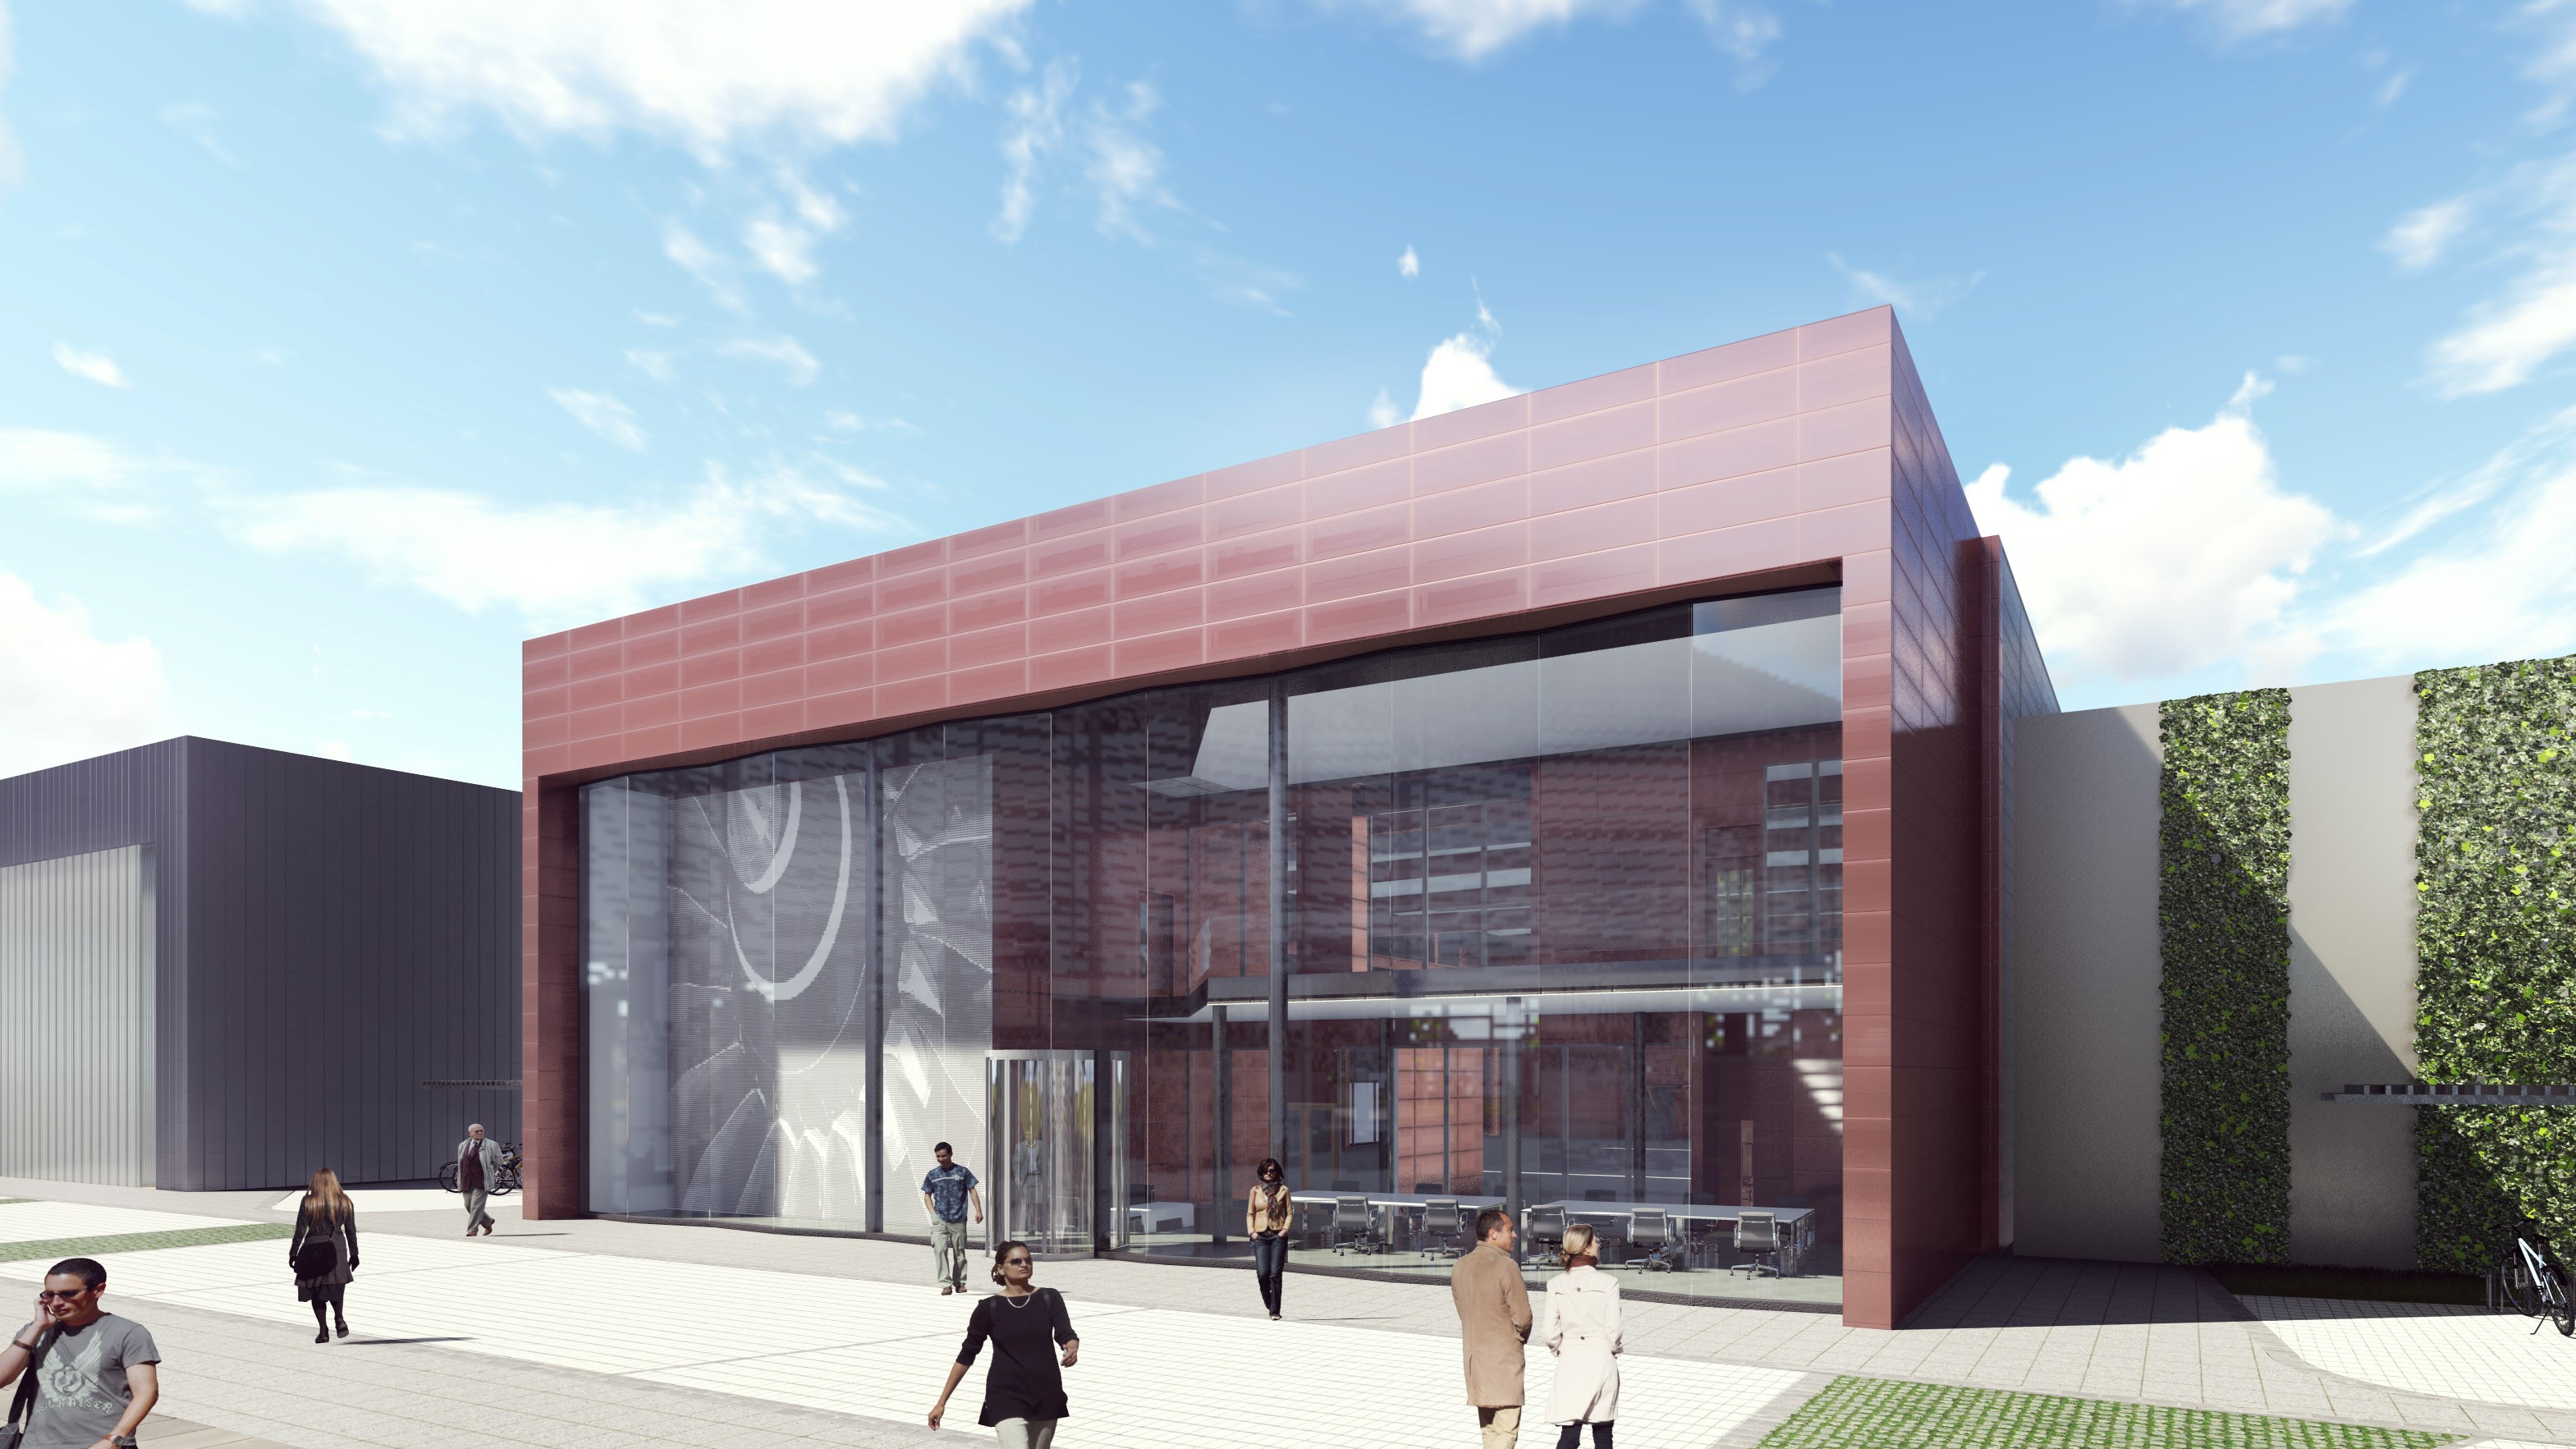 An artist's impression of the RTC building for Royce@Sheffield - An artist's impression of the RTC building for Royce@Sheffield